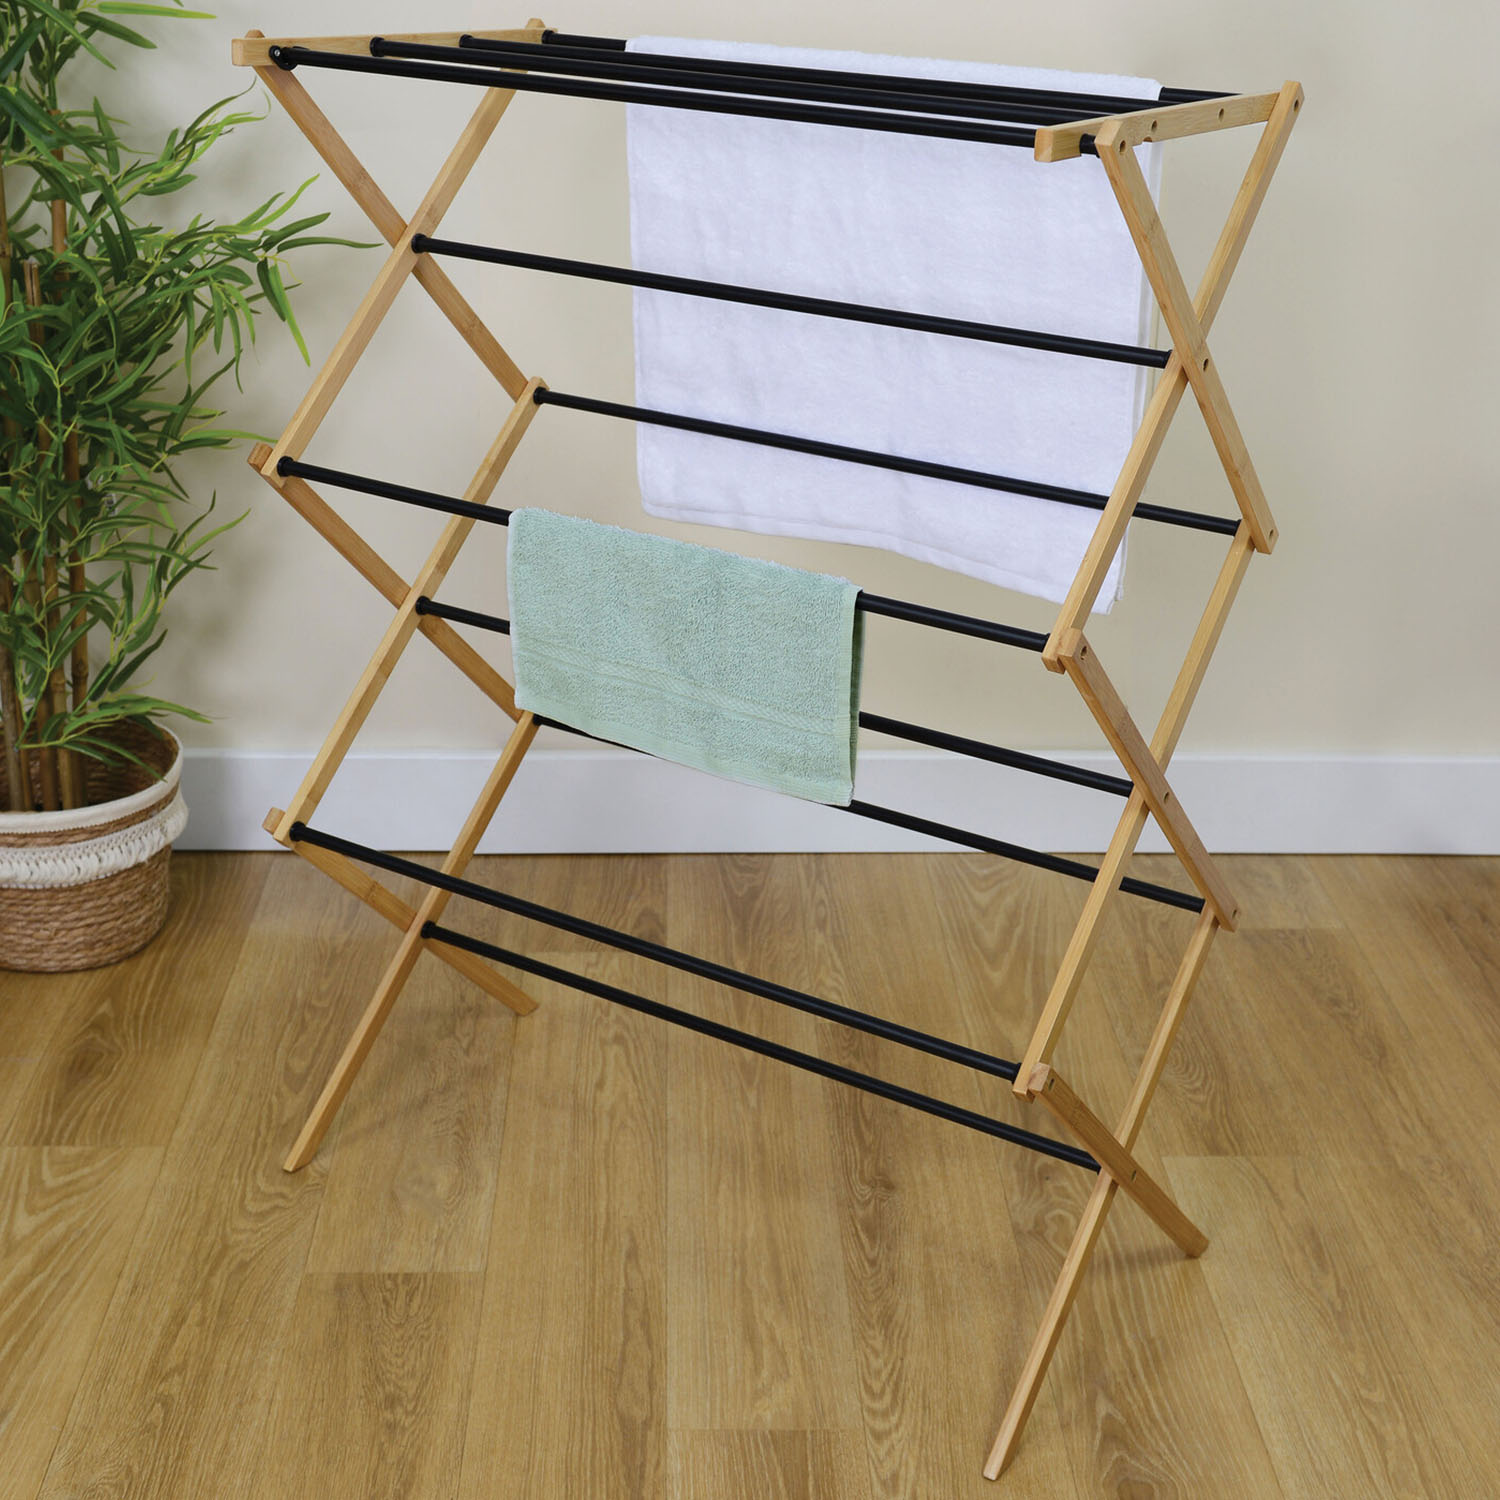 Bamboo 3 Tier Airer Image 3